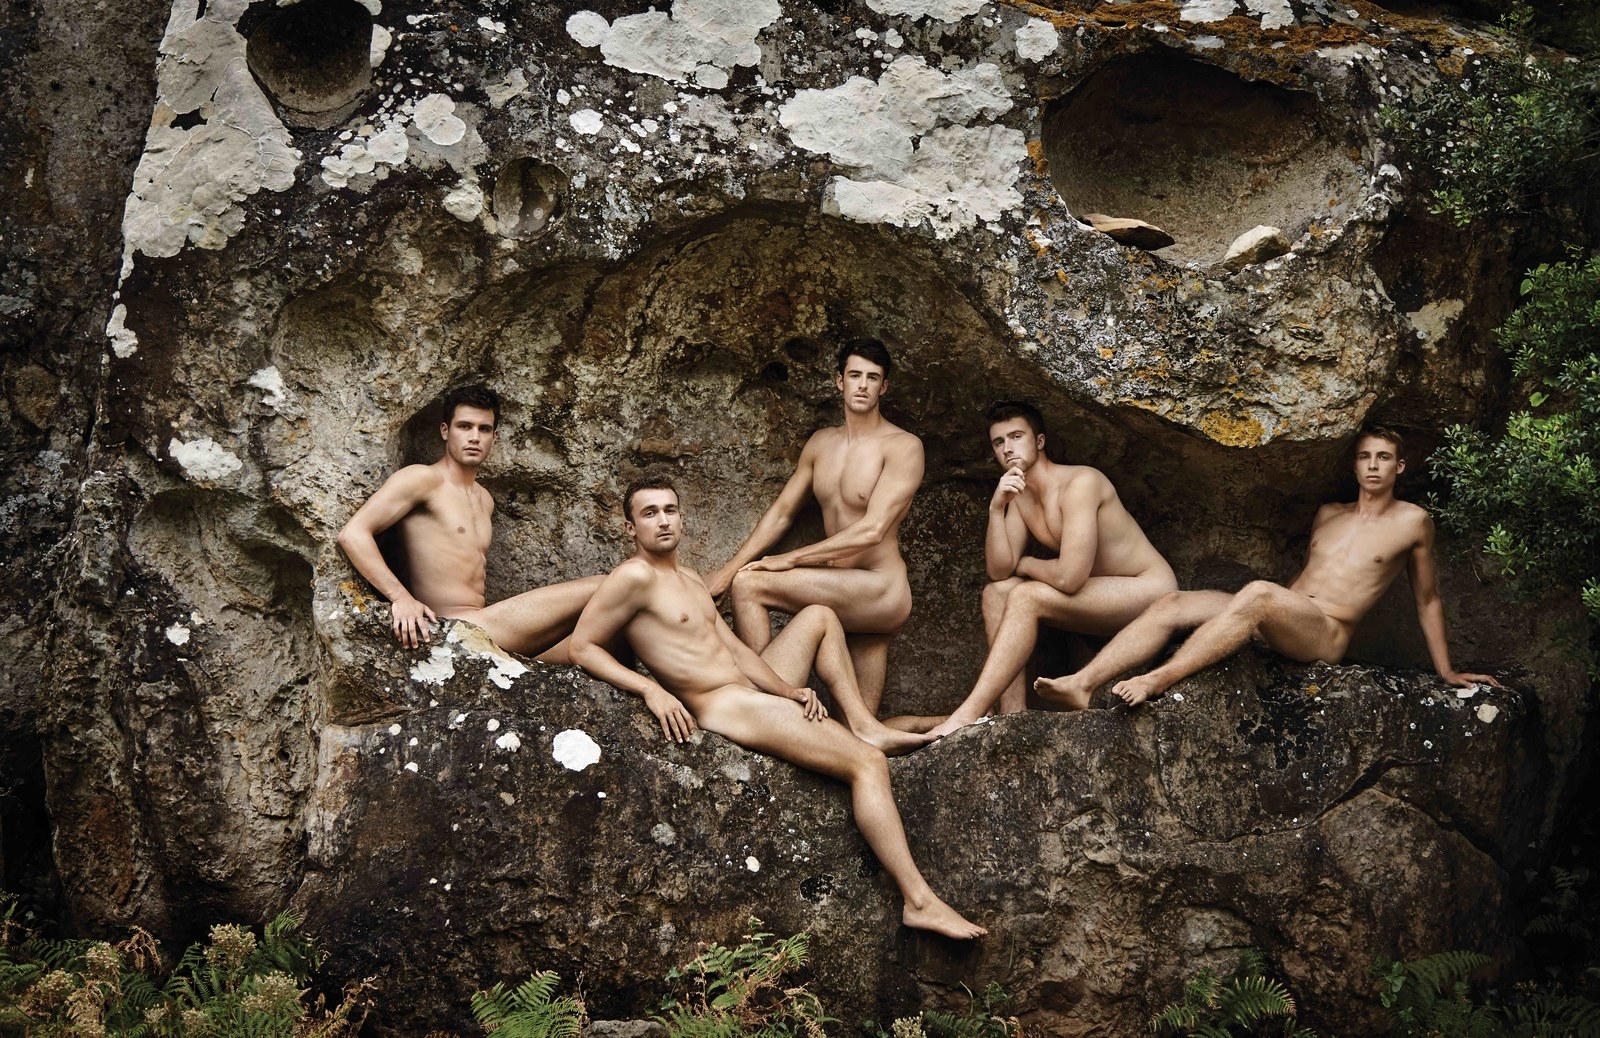 According to the Naked Rowers, the calendar serves three purposes - well